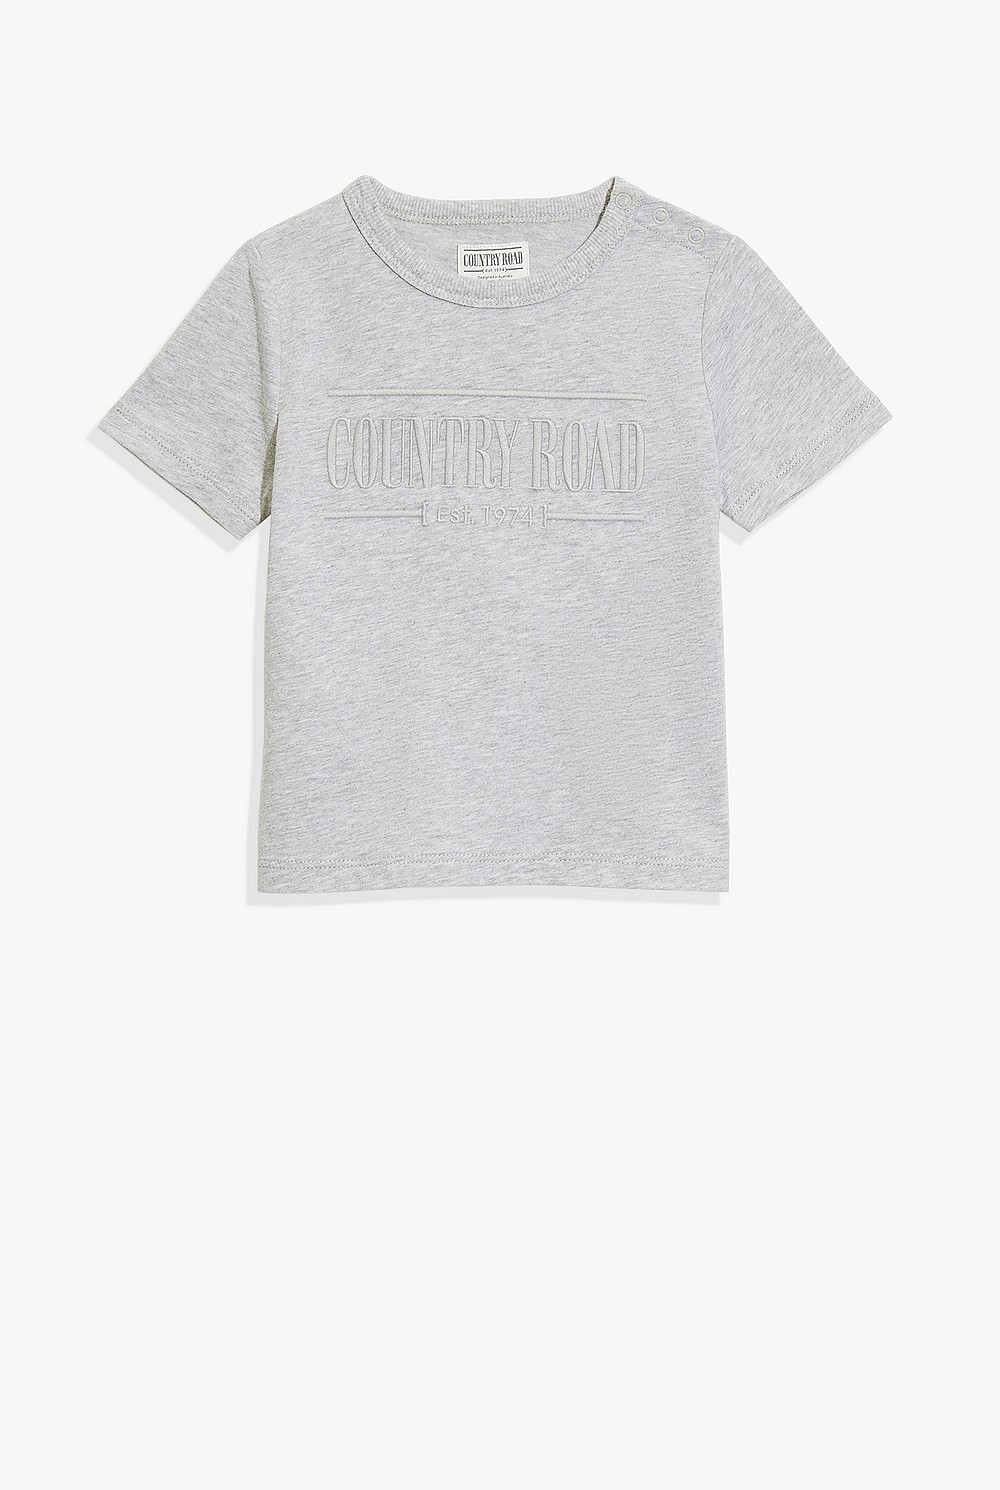 Country Road - Light Grey Marle Hertiage T-shirt